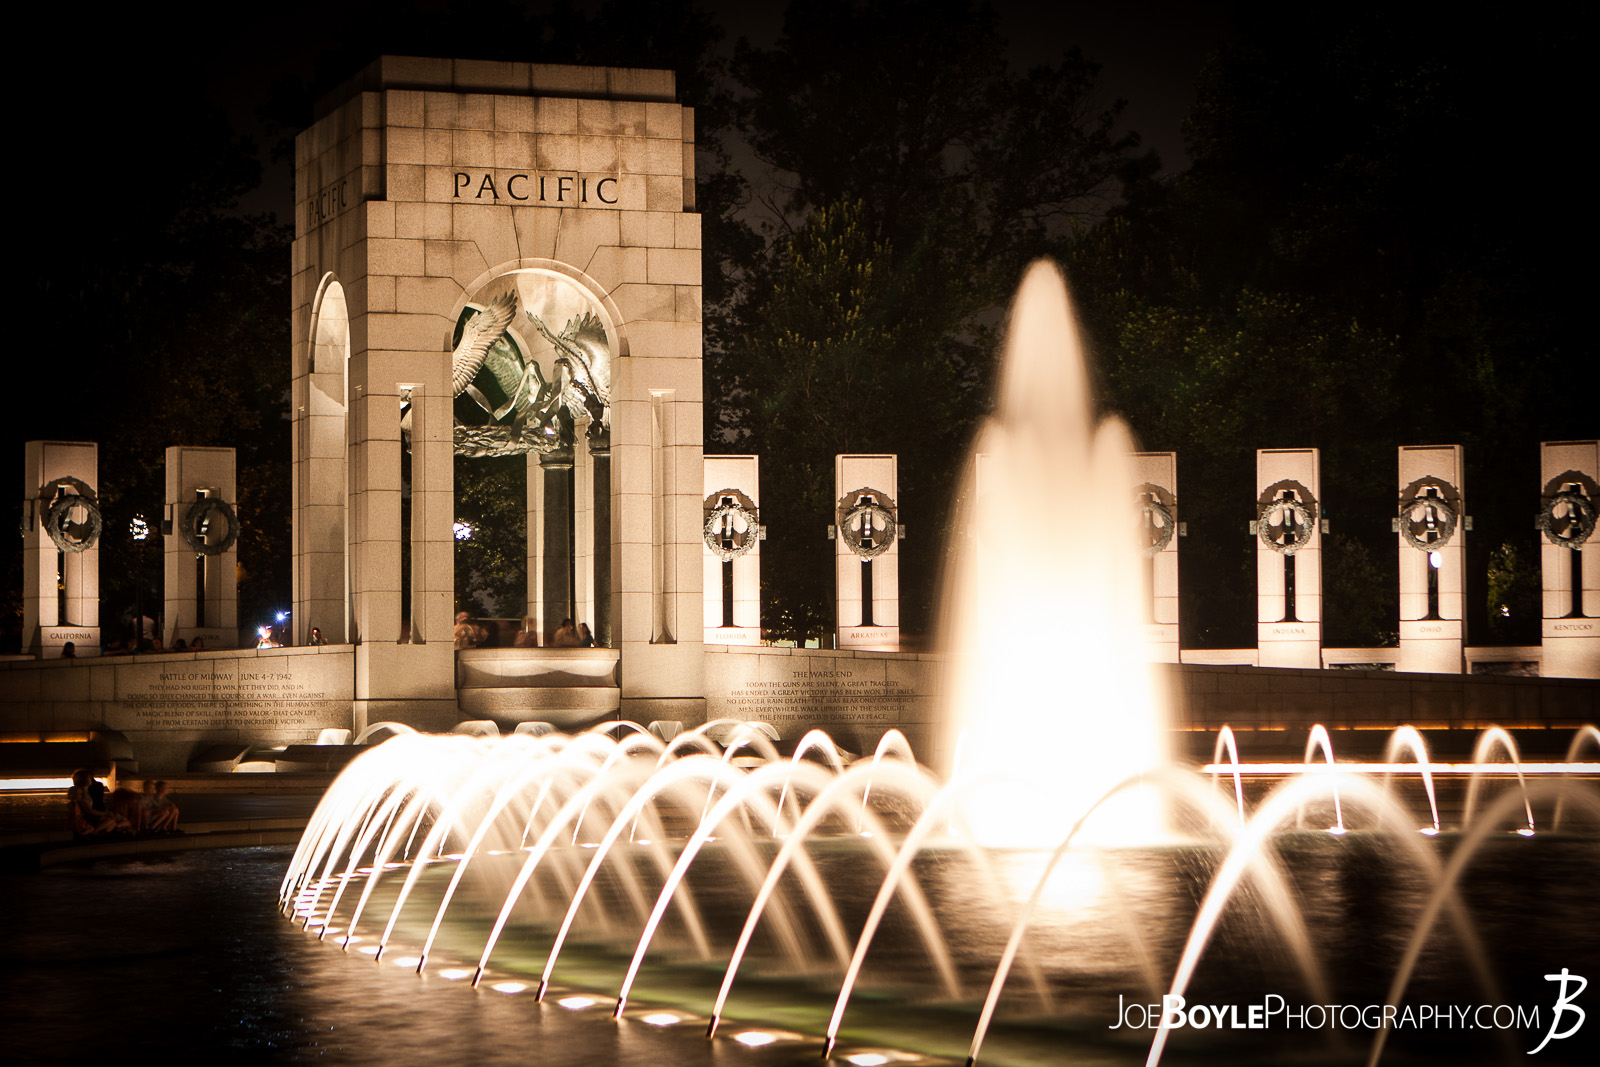  While I was in Washington, DC I was able to take some great night images of a few of the iconic landmarks that make up this city such as this image: The World War II Memorial! I love taking long exposure, night shots of moving water and fountains! 